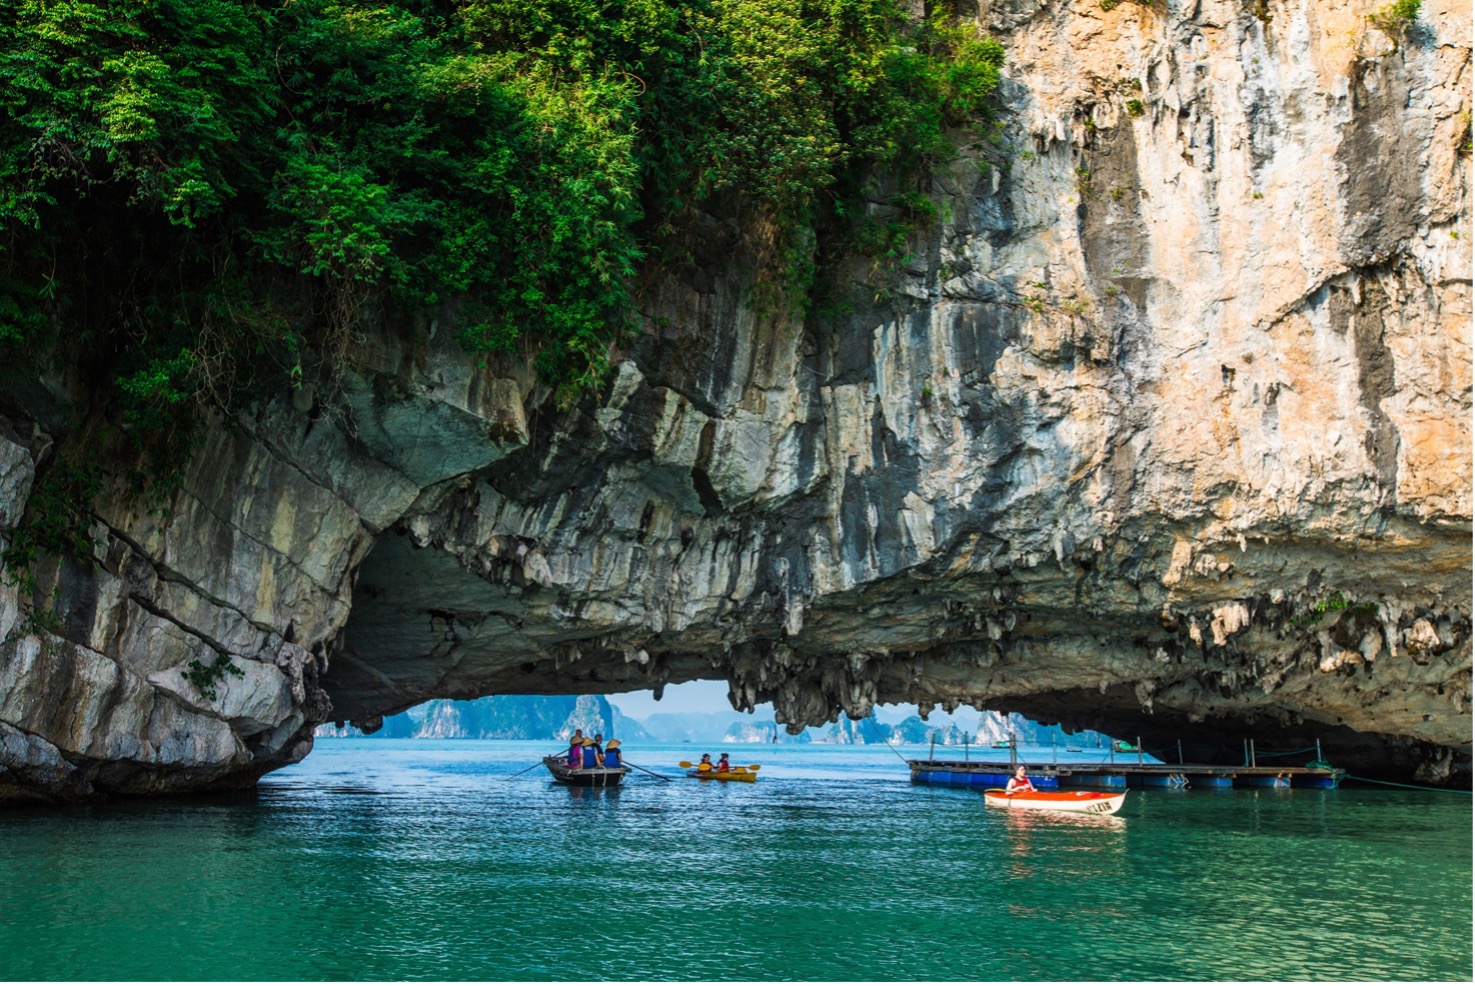 HA LONG BAY WAS HONORED BY MEXICO JOURNAL